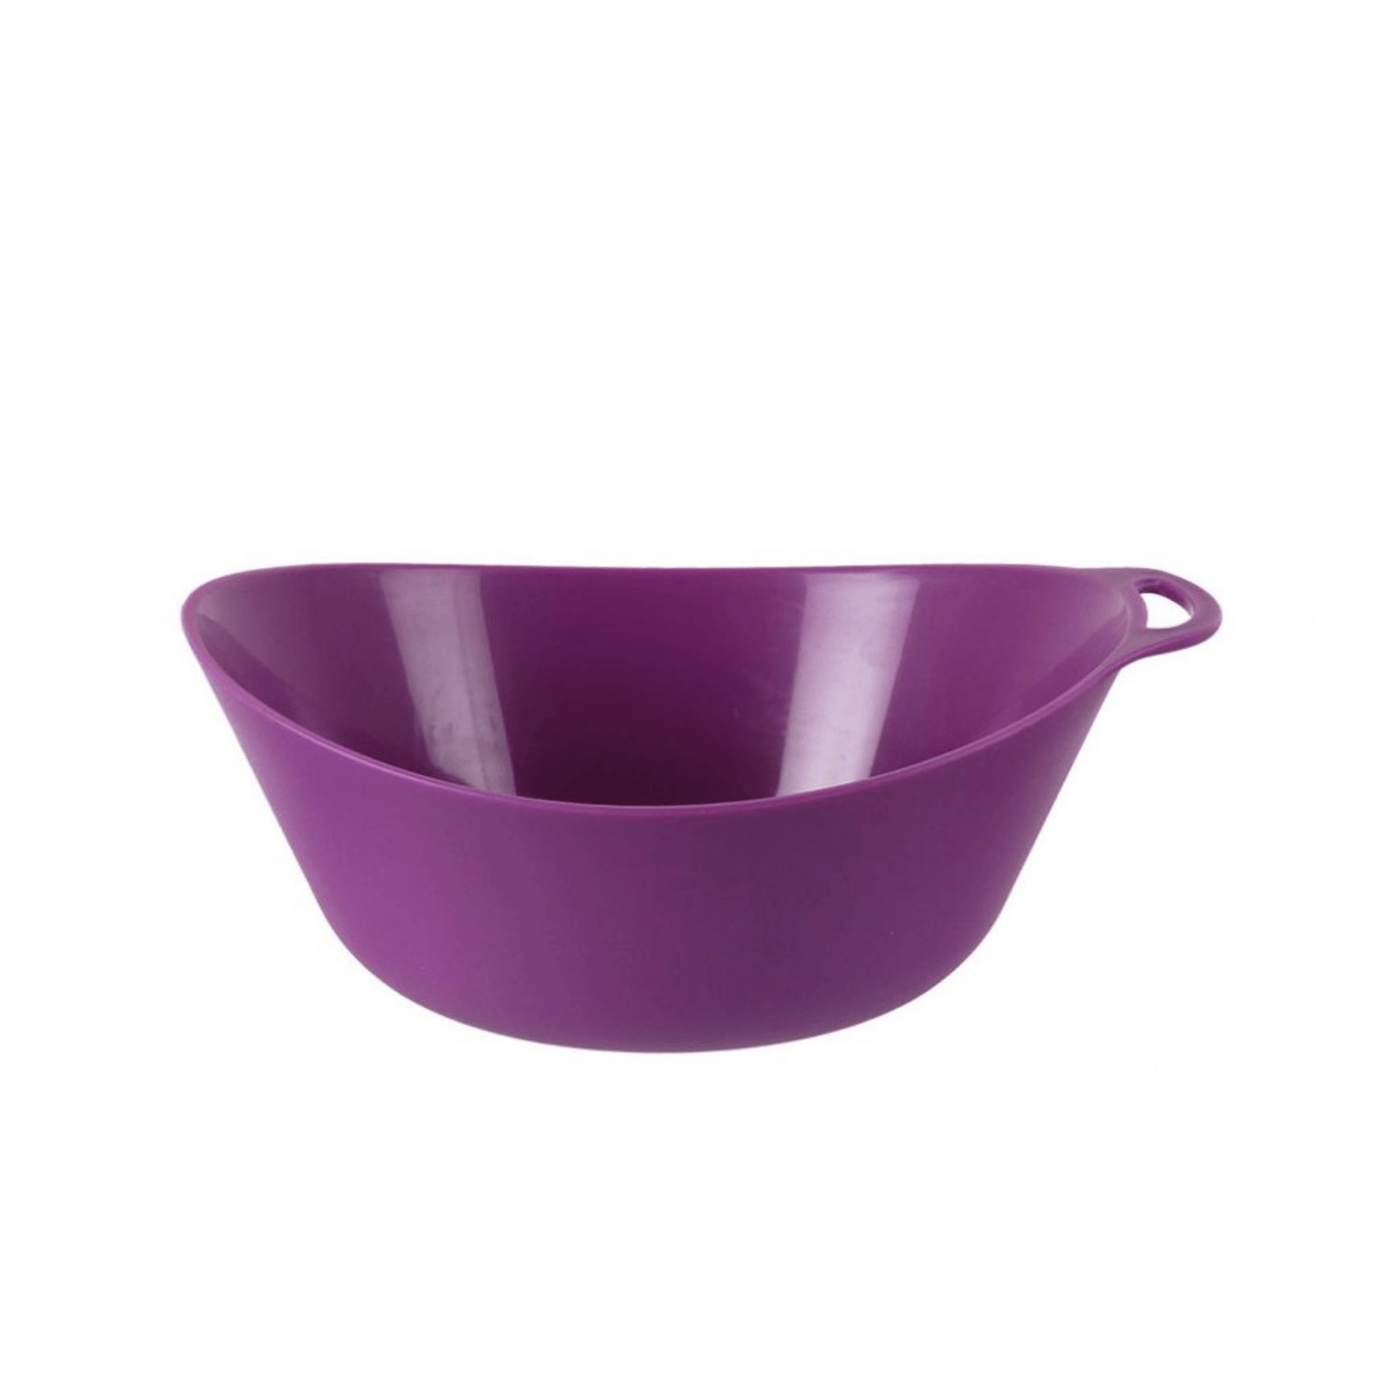 Lifeventure Ellipse Bowl | Outdoor and Camping Cookware | Further Faster Christchurch NZ #purple